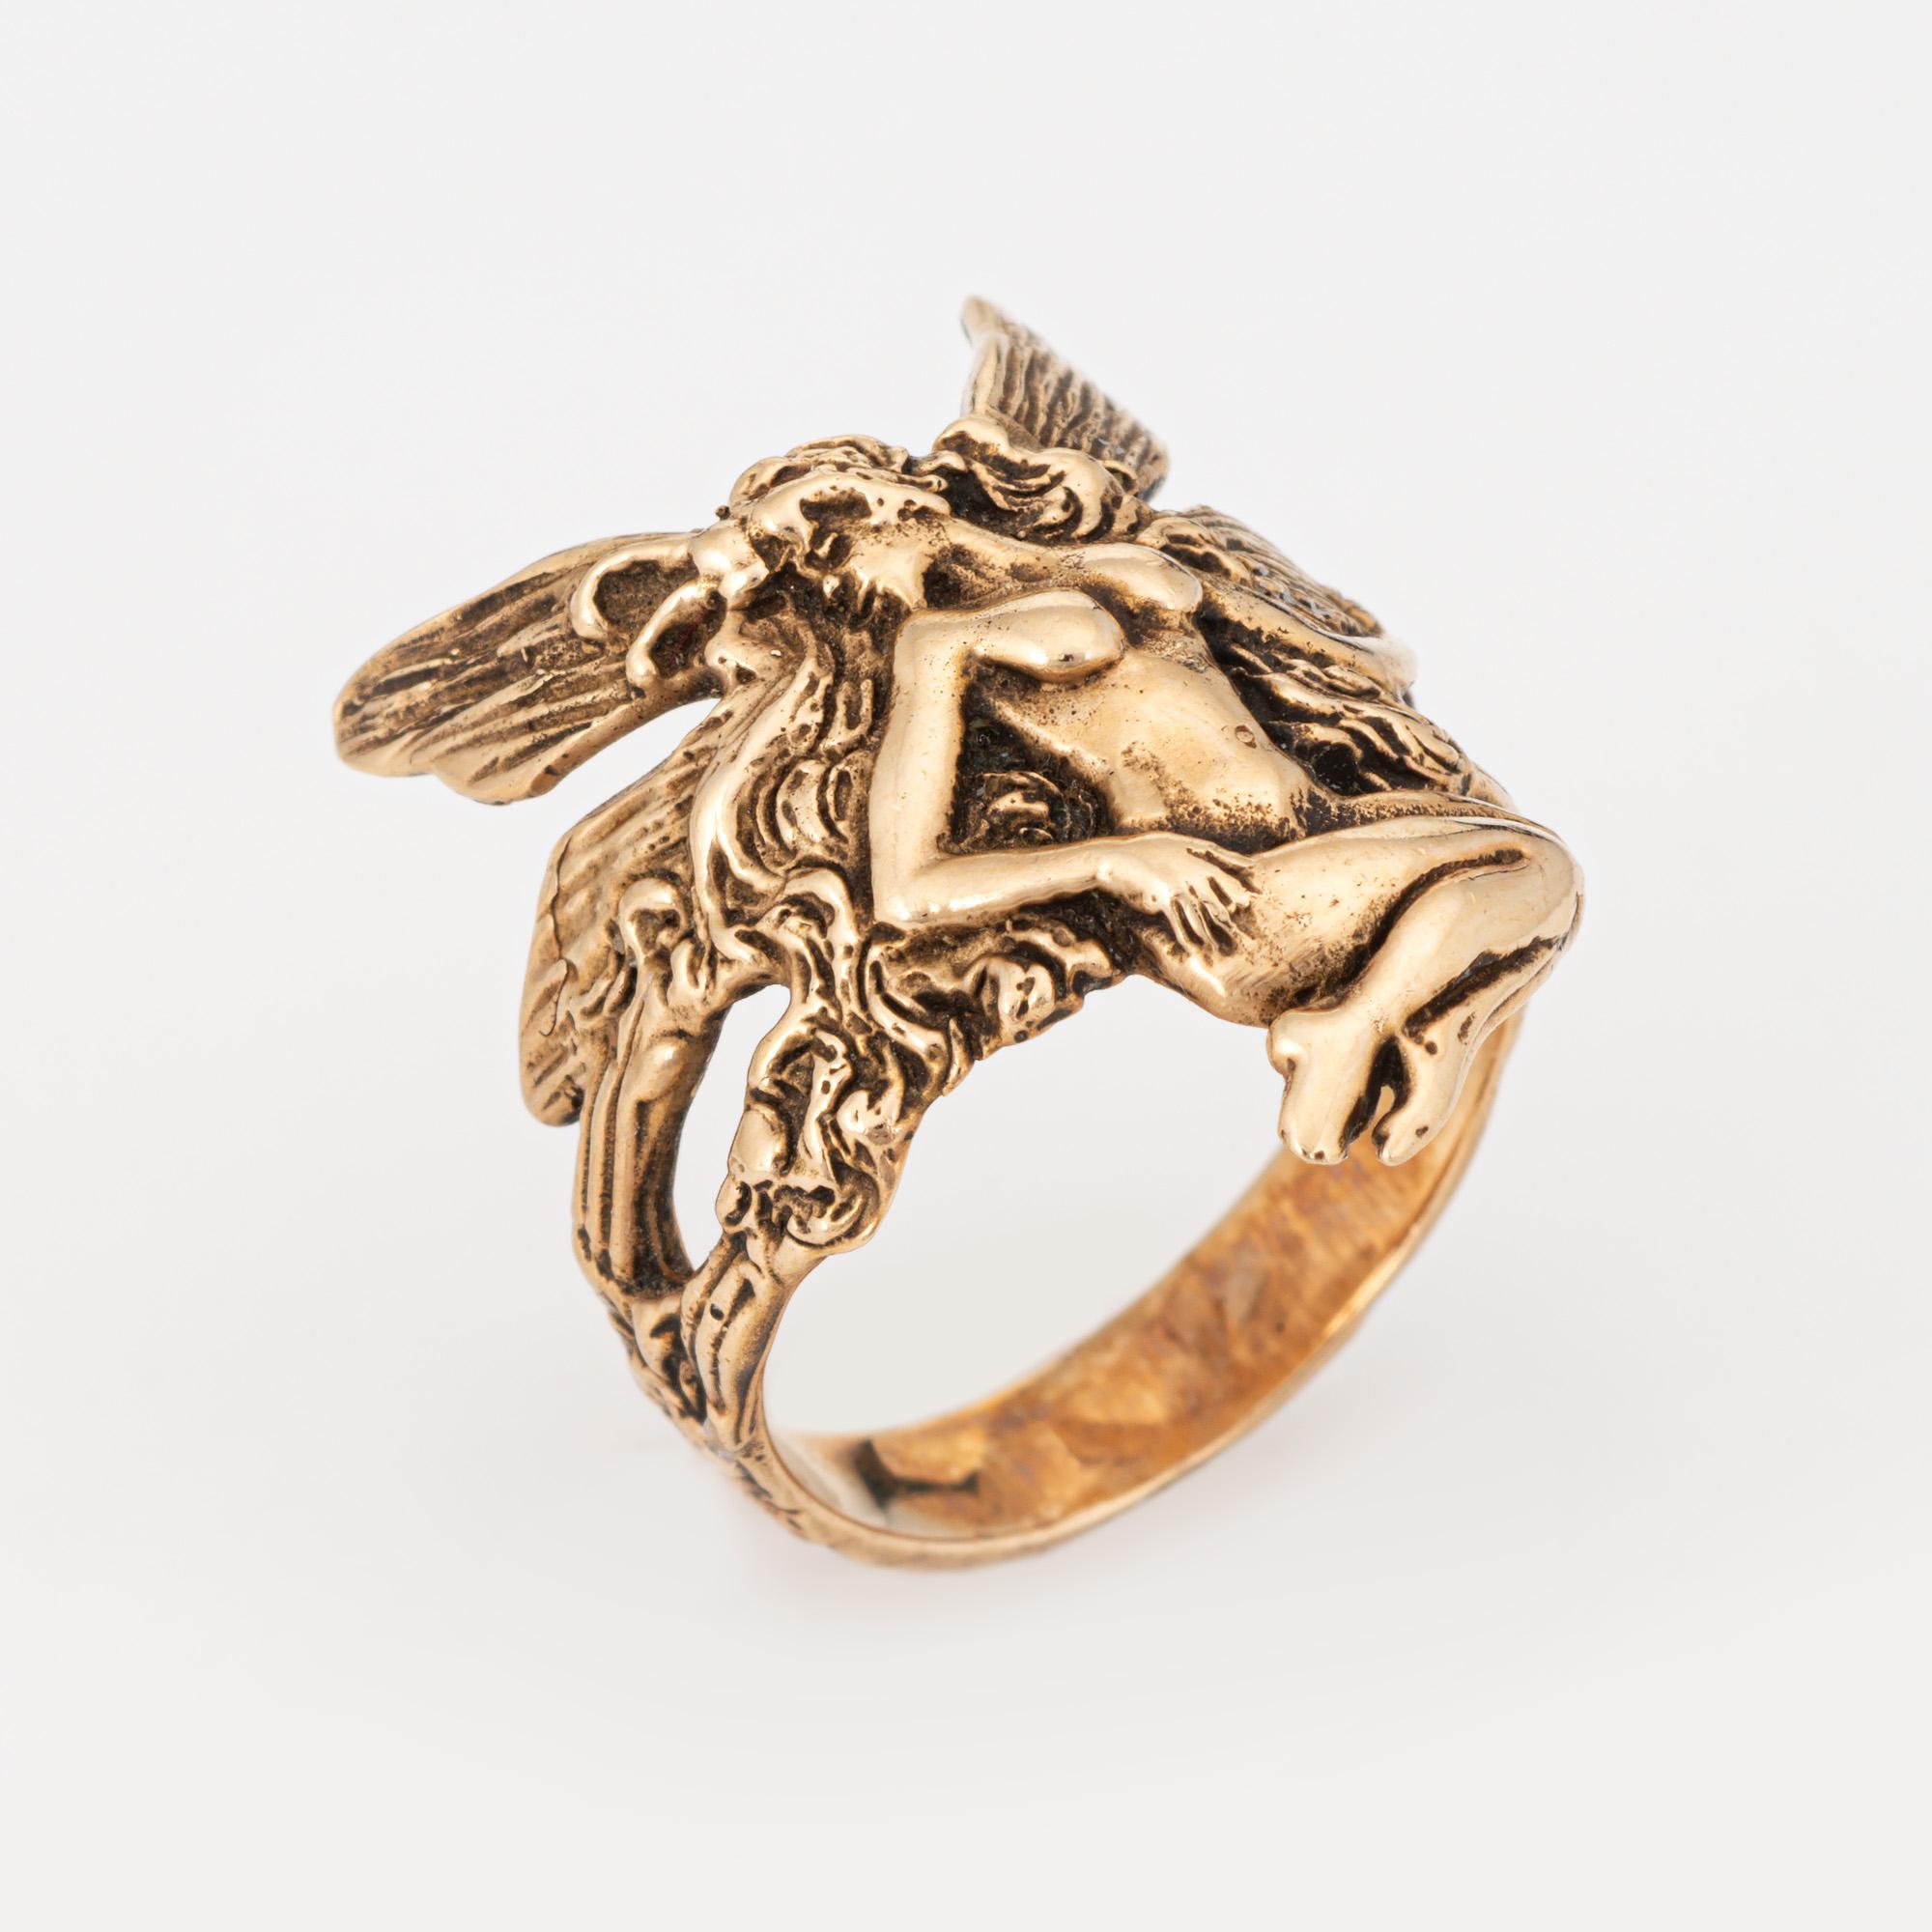 Stylish and finely detailed fairy ring crafted in 14 karat yellow gold. 

The ethereal ring depicts a winged fairy in sitting pose. The magical ring makes a nice statement on the hand. The low rise ring (2.2mm - 0.08 inches) sits comfortably on the